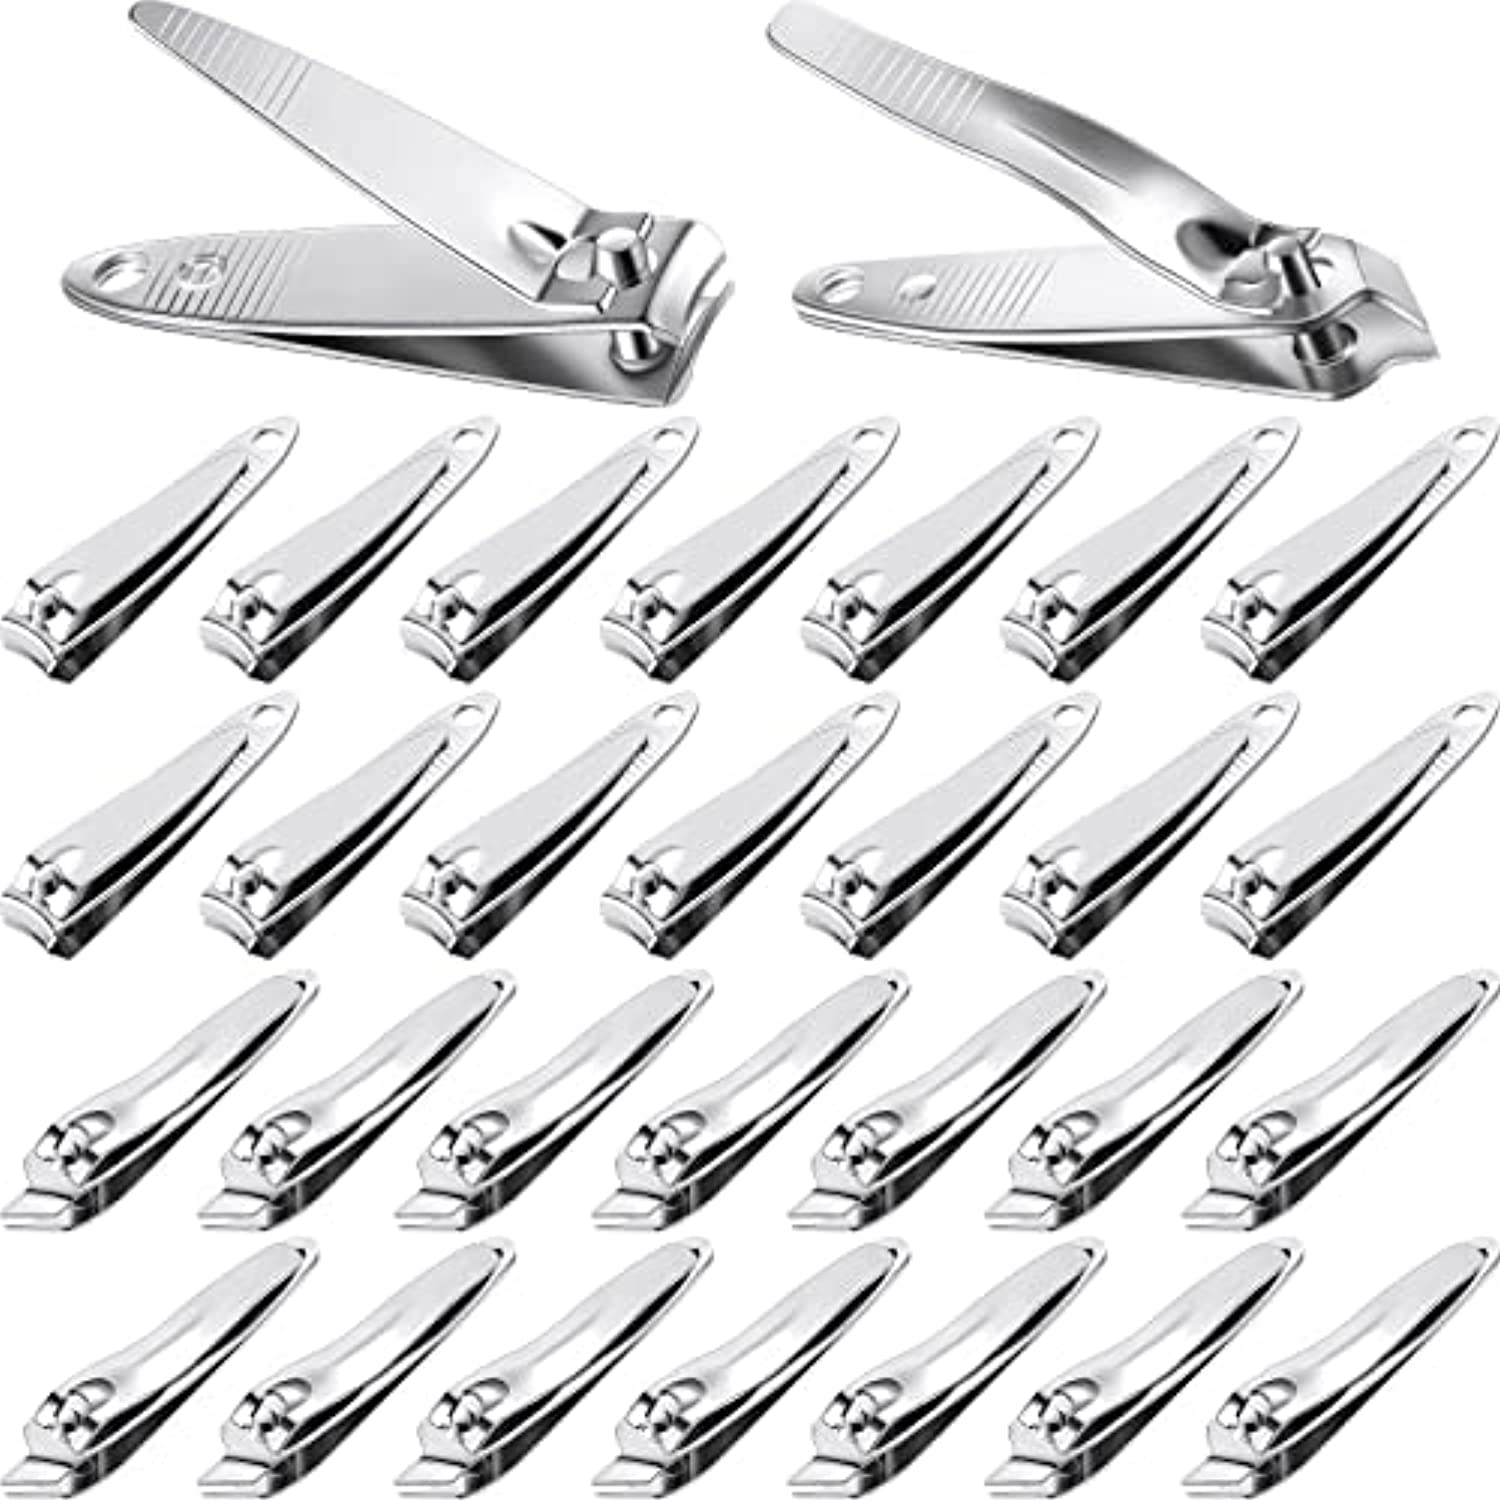 28 Pcs Nail Clippers Stainless Steel Fingernail and Toenail Clipper Slanted Pointed Nail Cutter Straight Edge Nail Clipper Pointed Sturdy Trimmer Set for Men and Women, 2 Designs